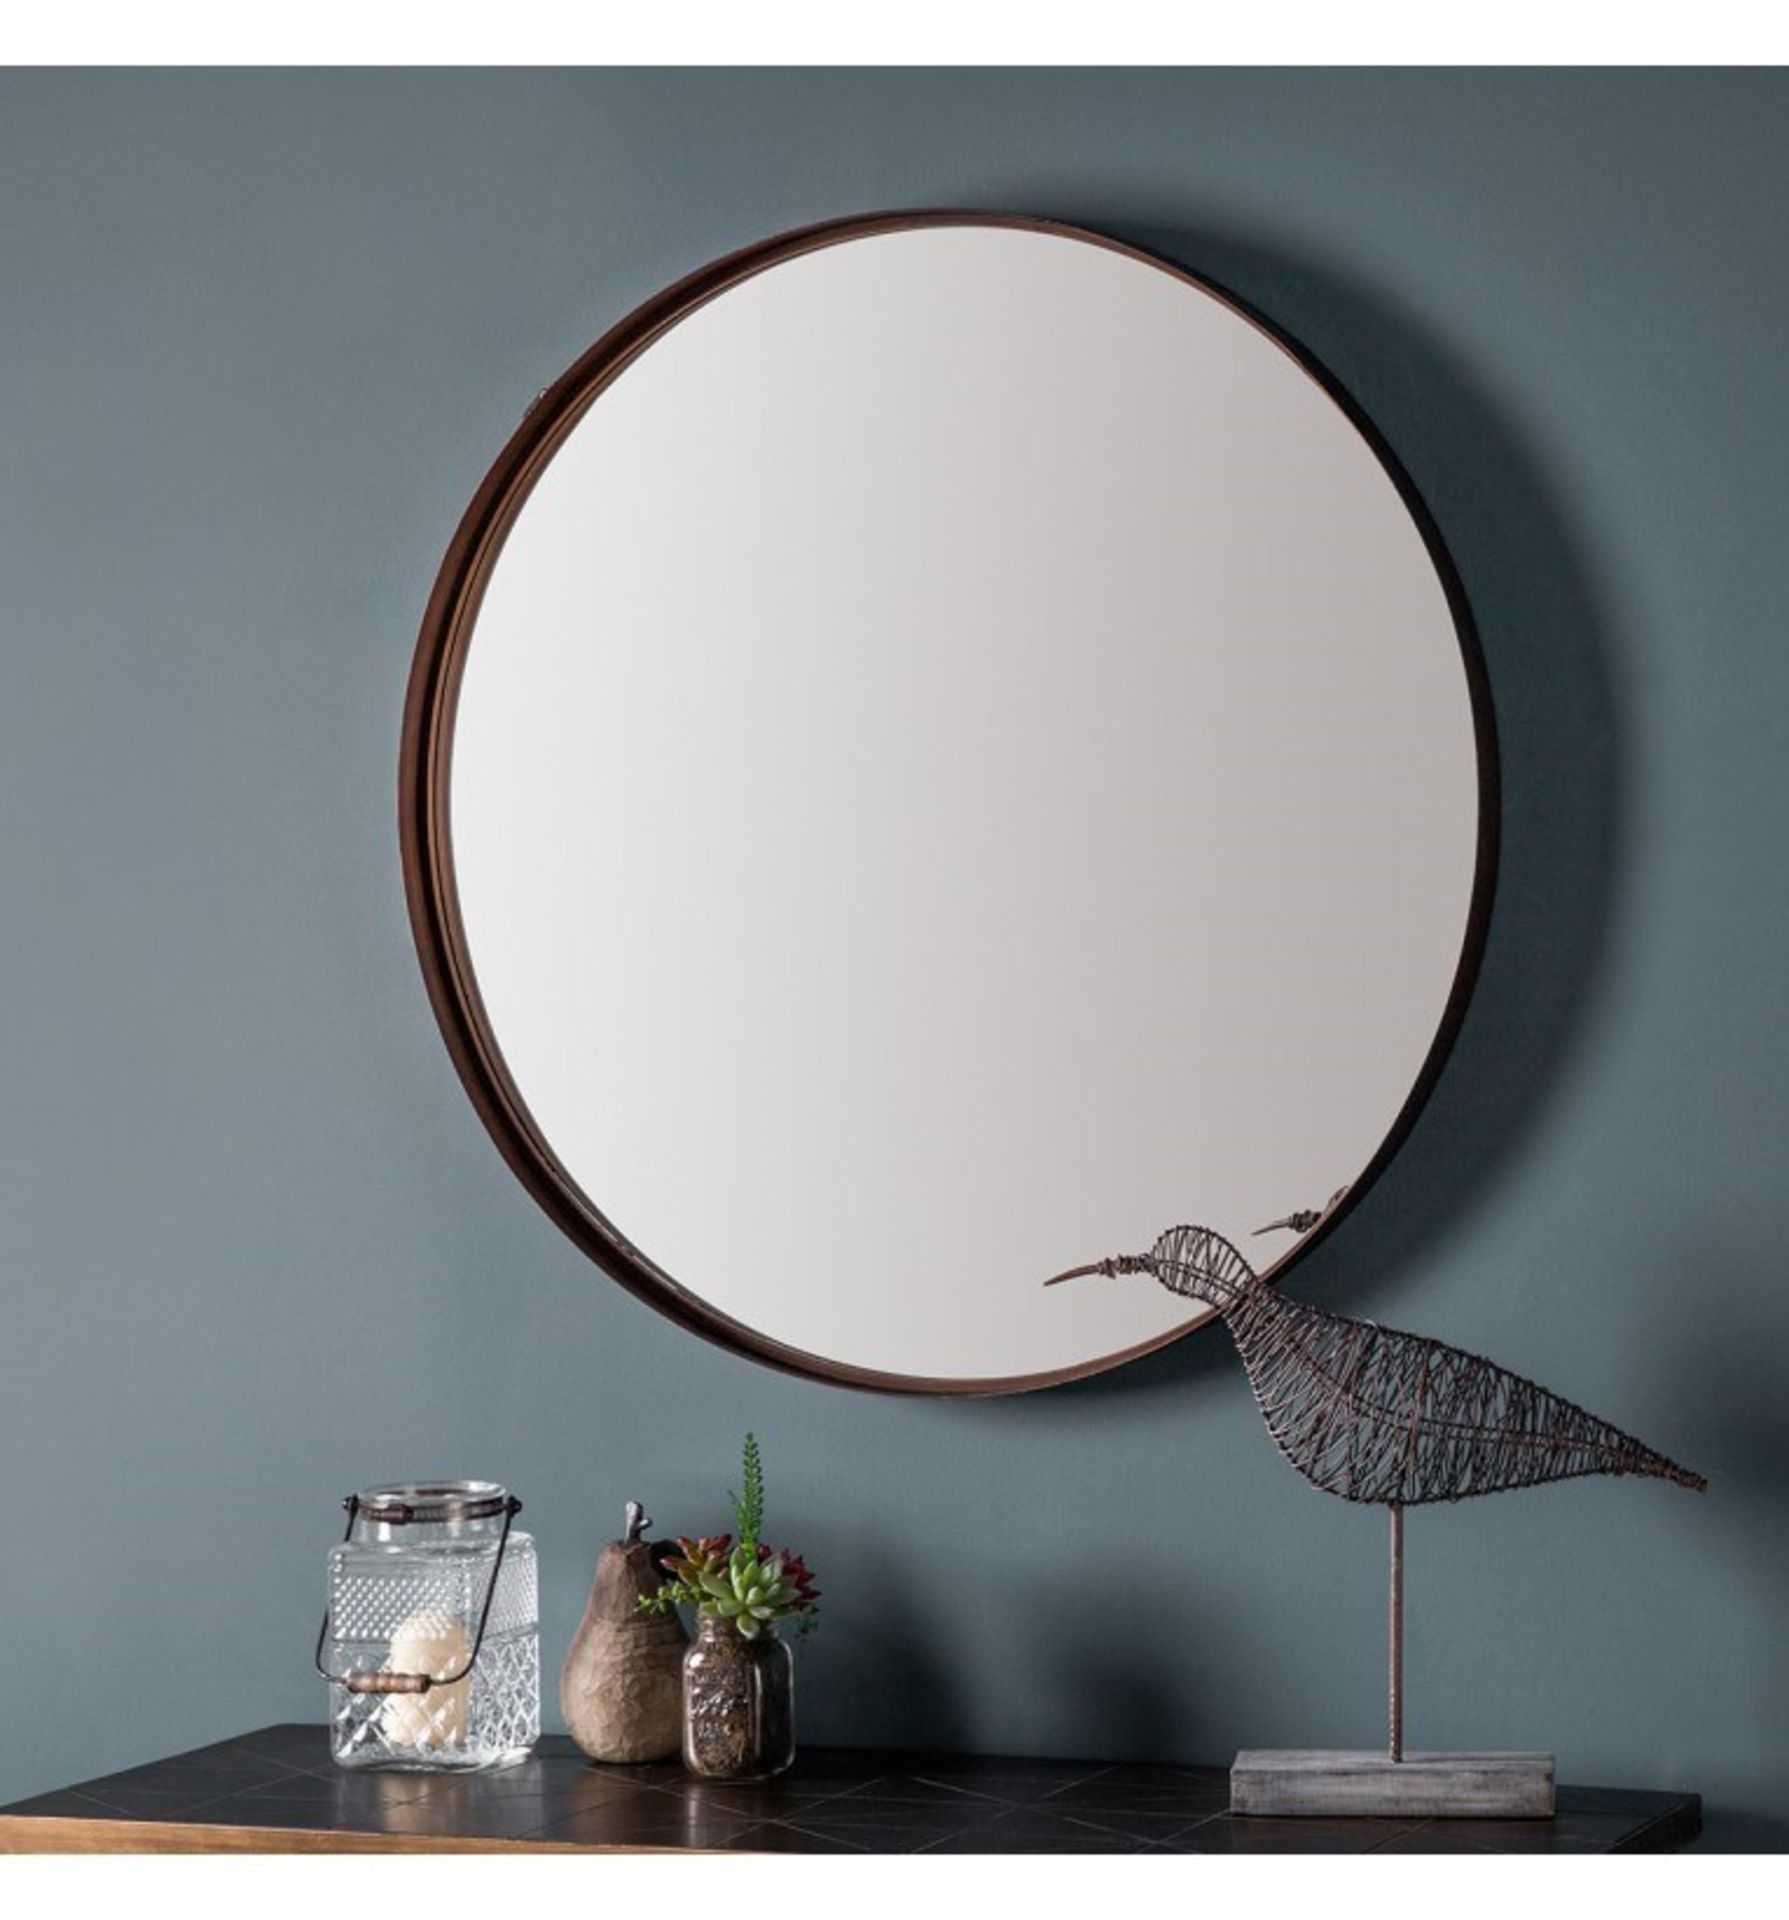 Greystoke 830mm Sleek and stylish round metal framed mirror in an aged bronze finish.